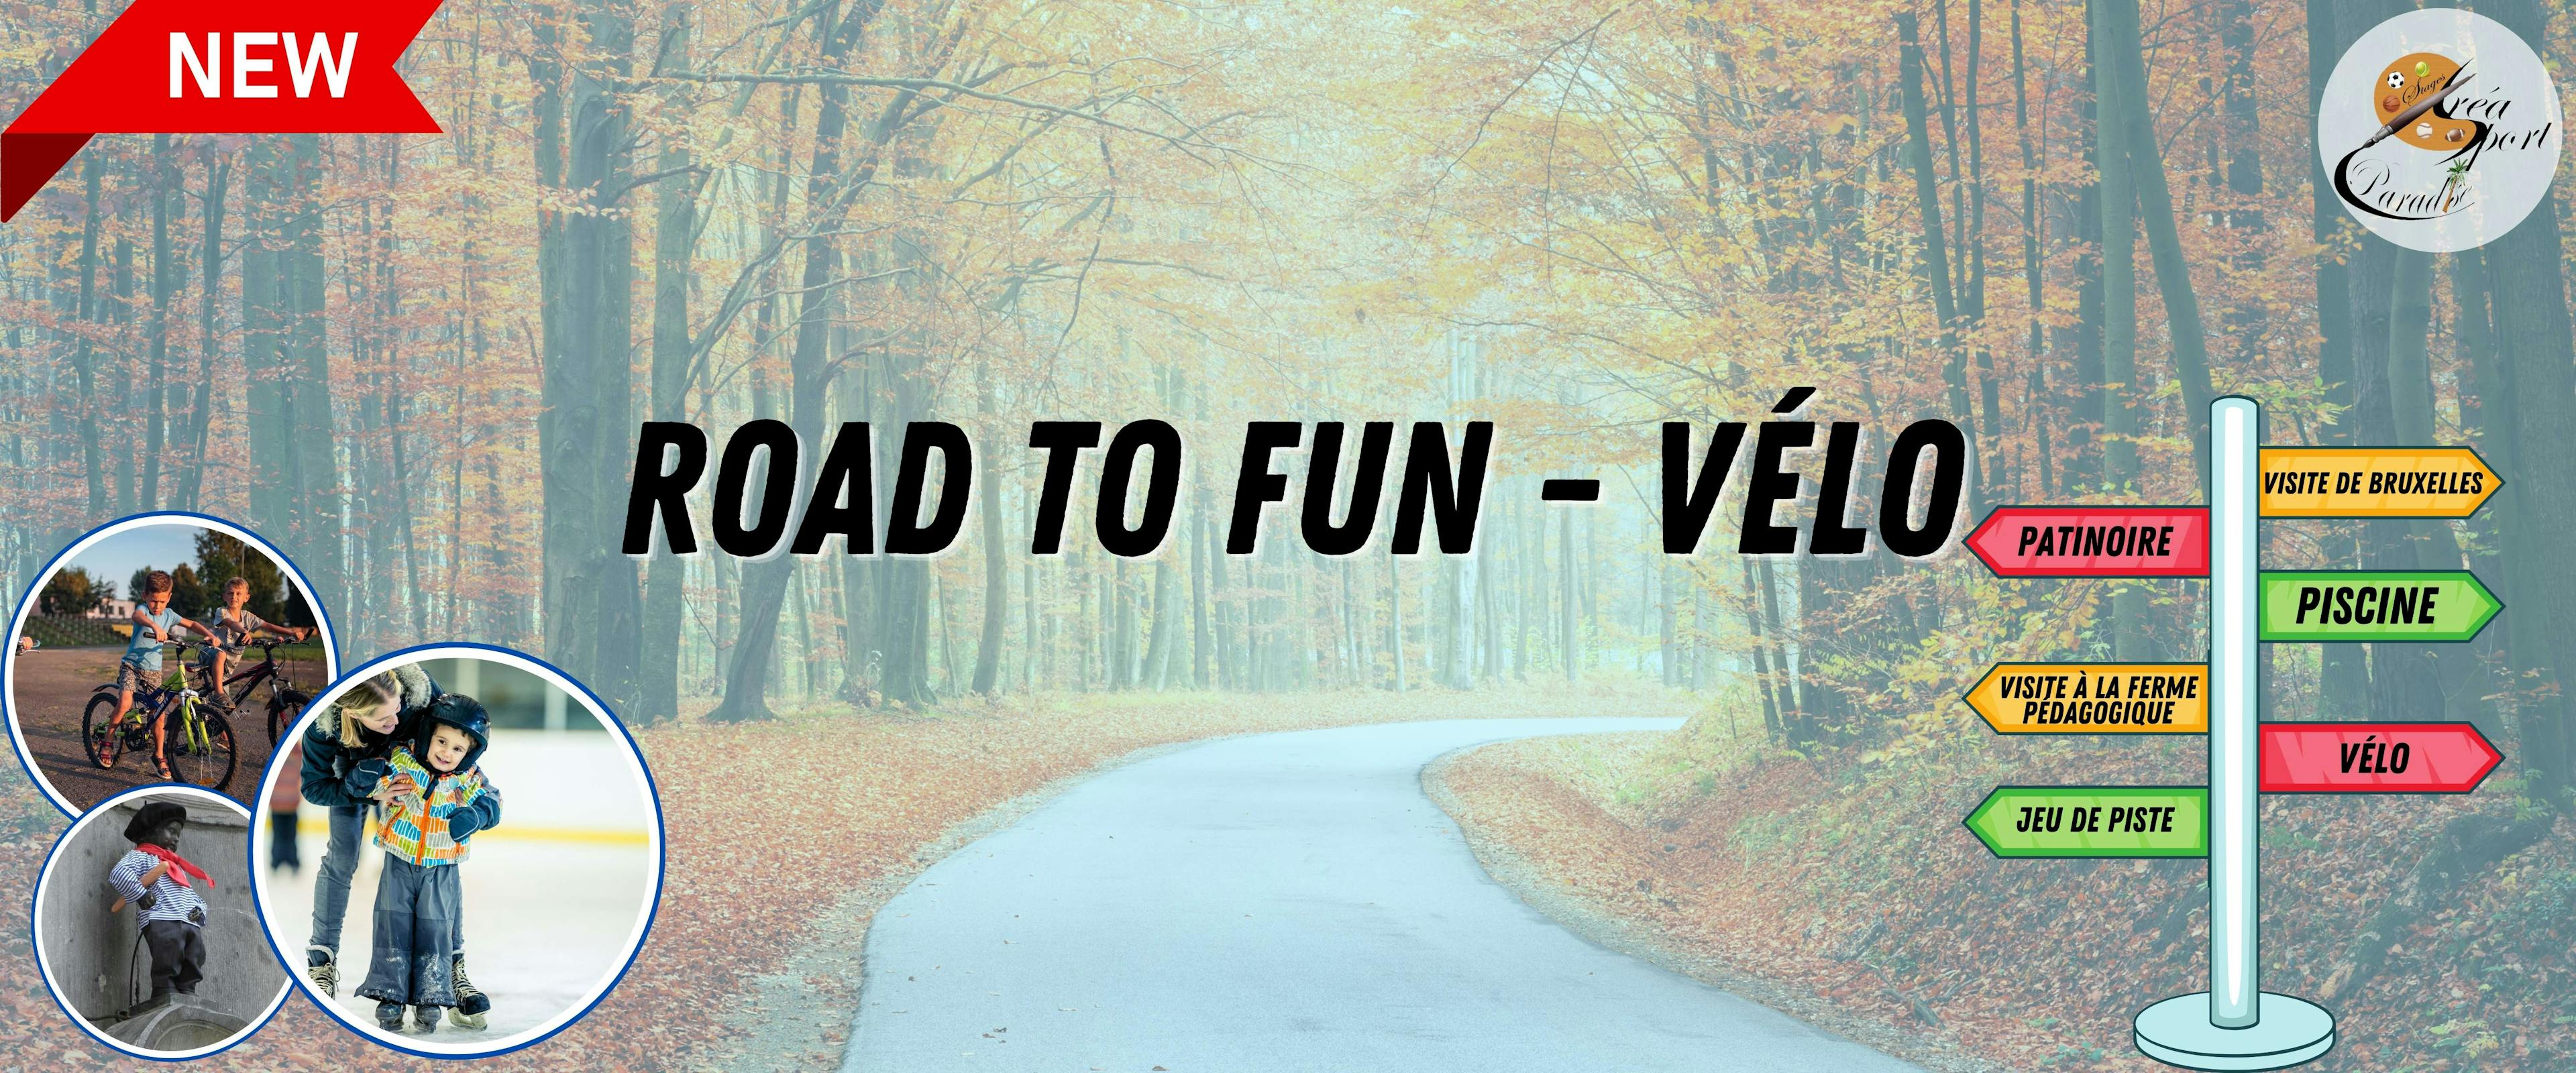 Automne S1 : Road to fun - Vélo (NEW) 